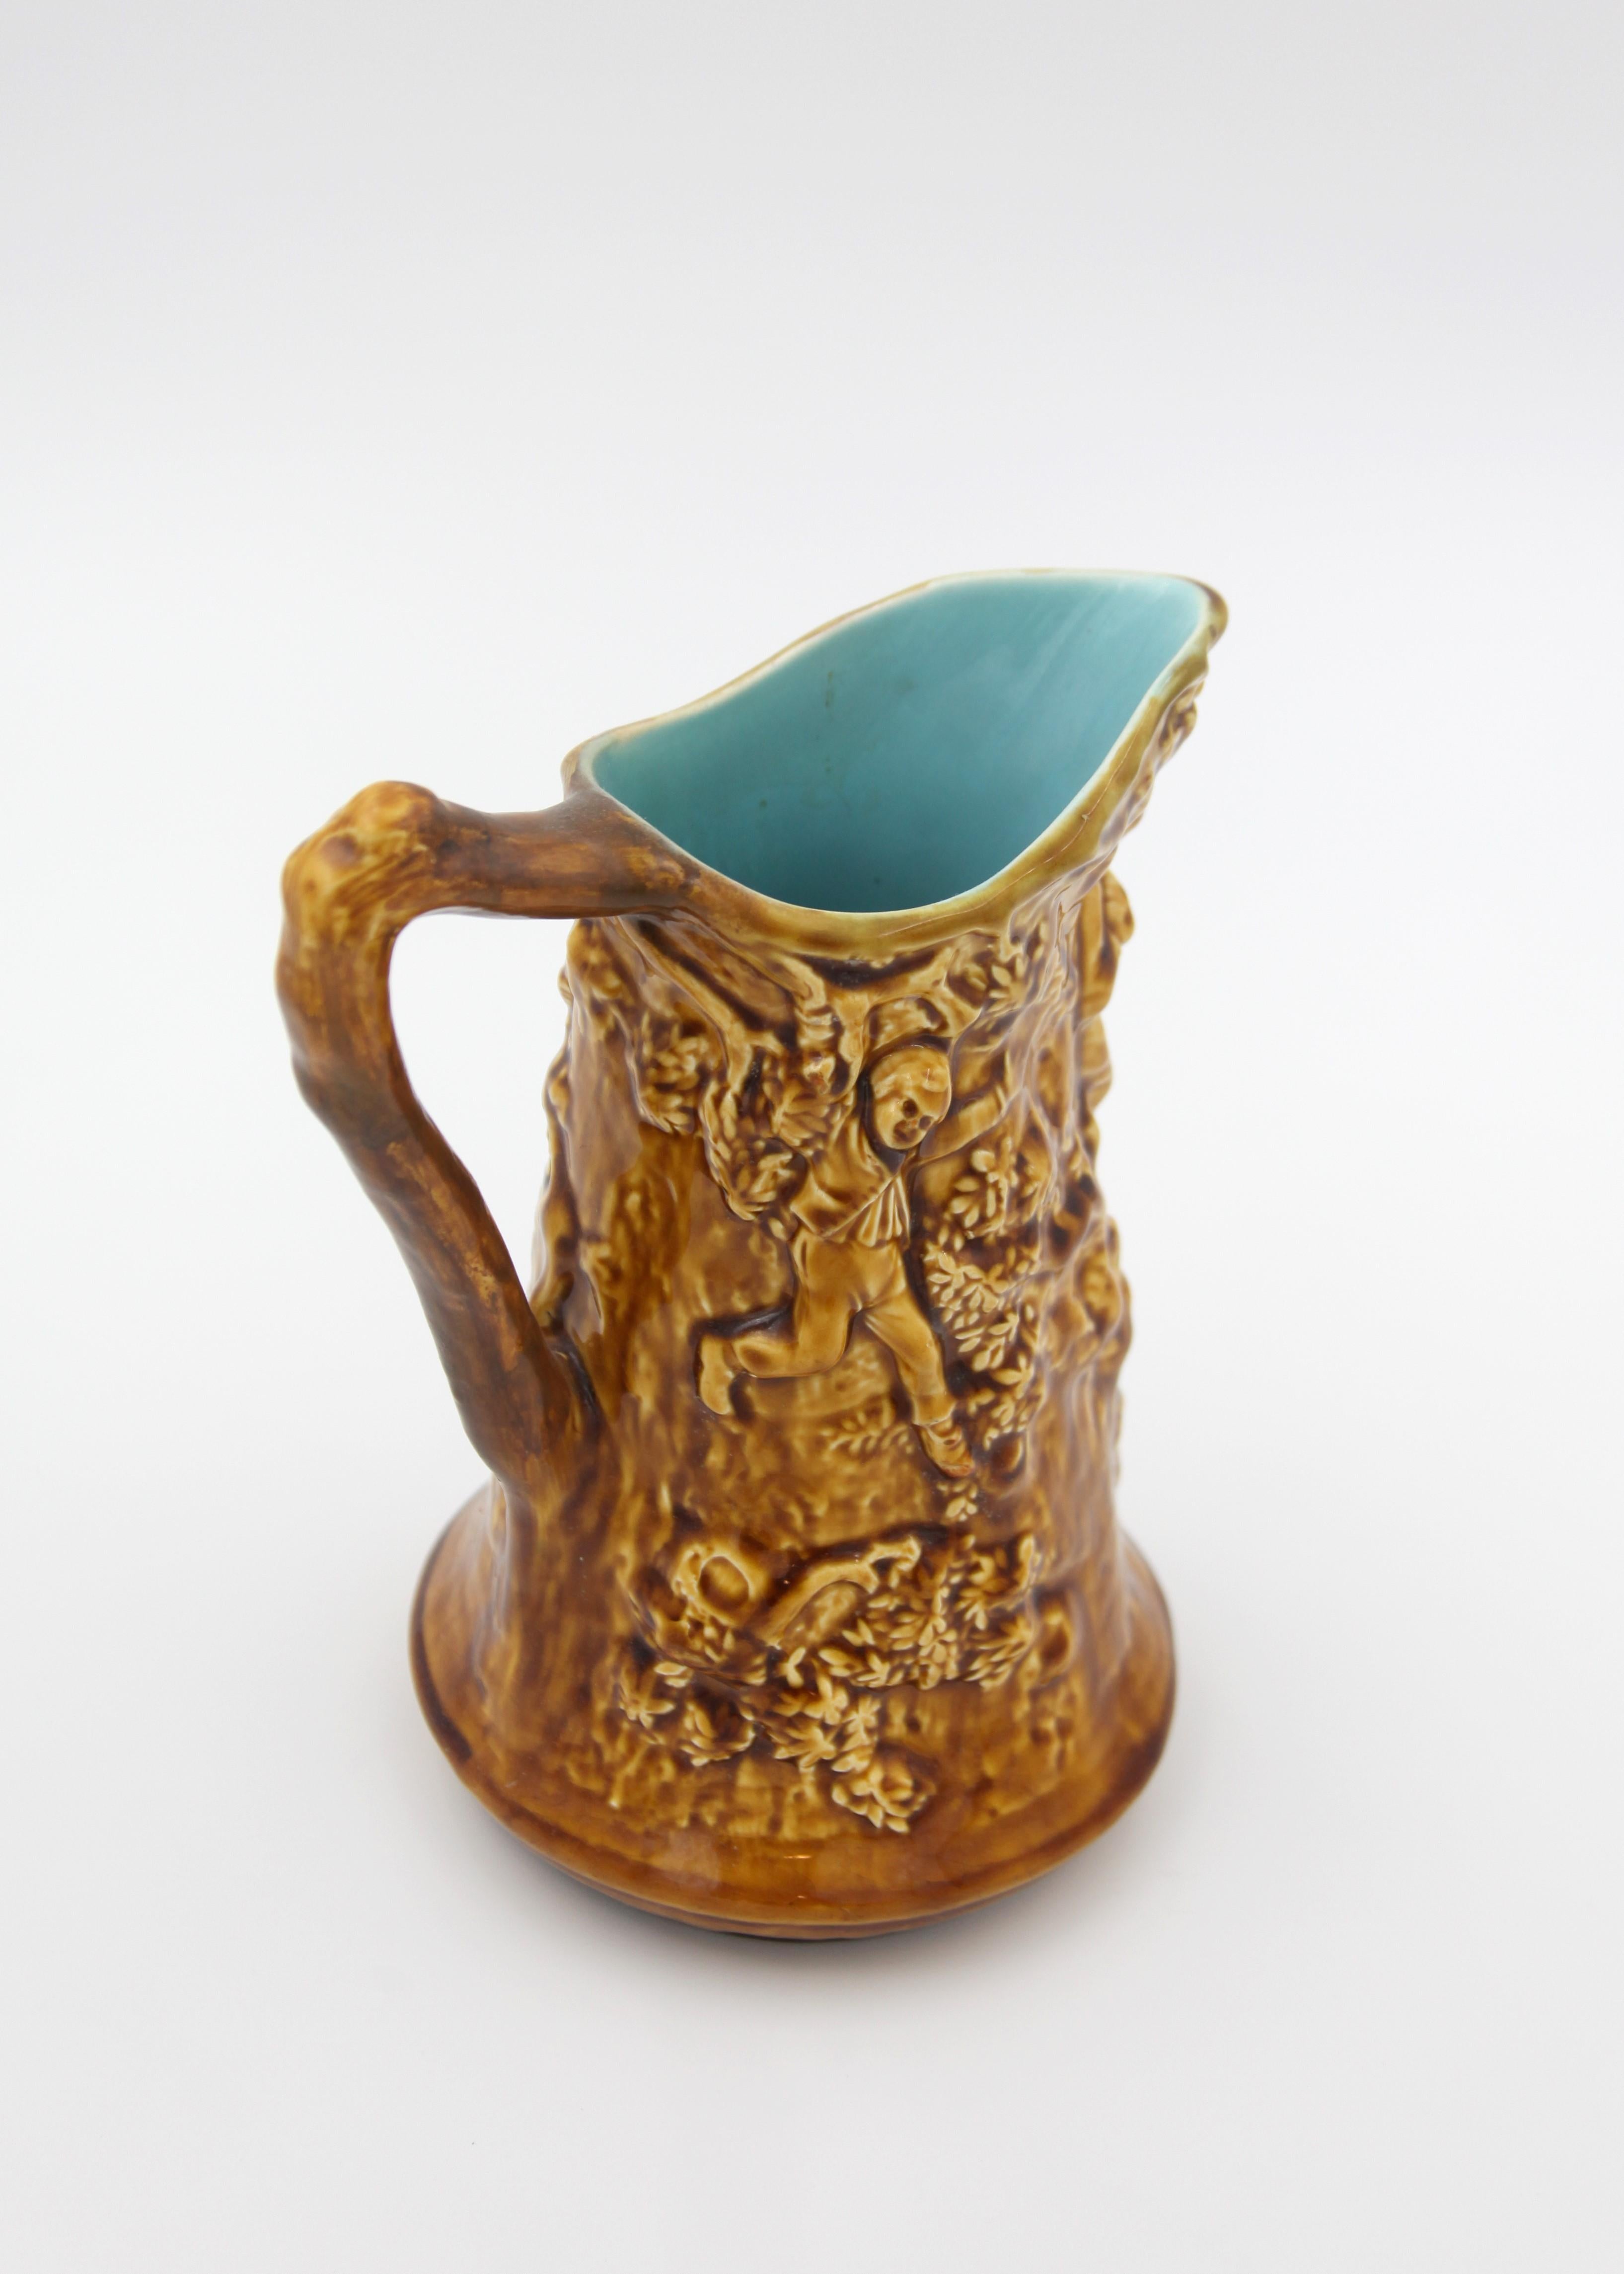 Glazed Early Yellow Majolica Pitcher Sarreguemines, Circa 1870 For Sale